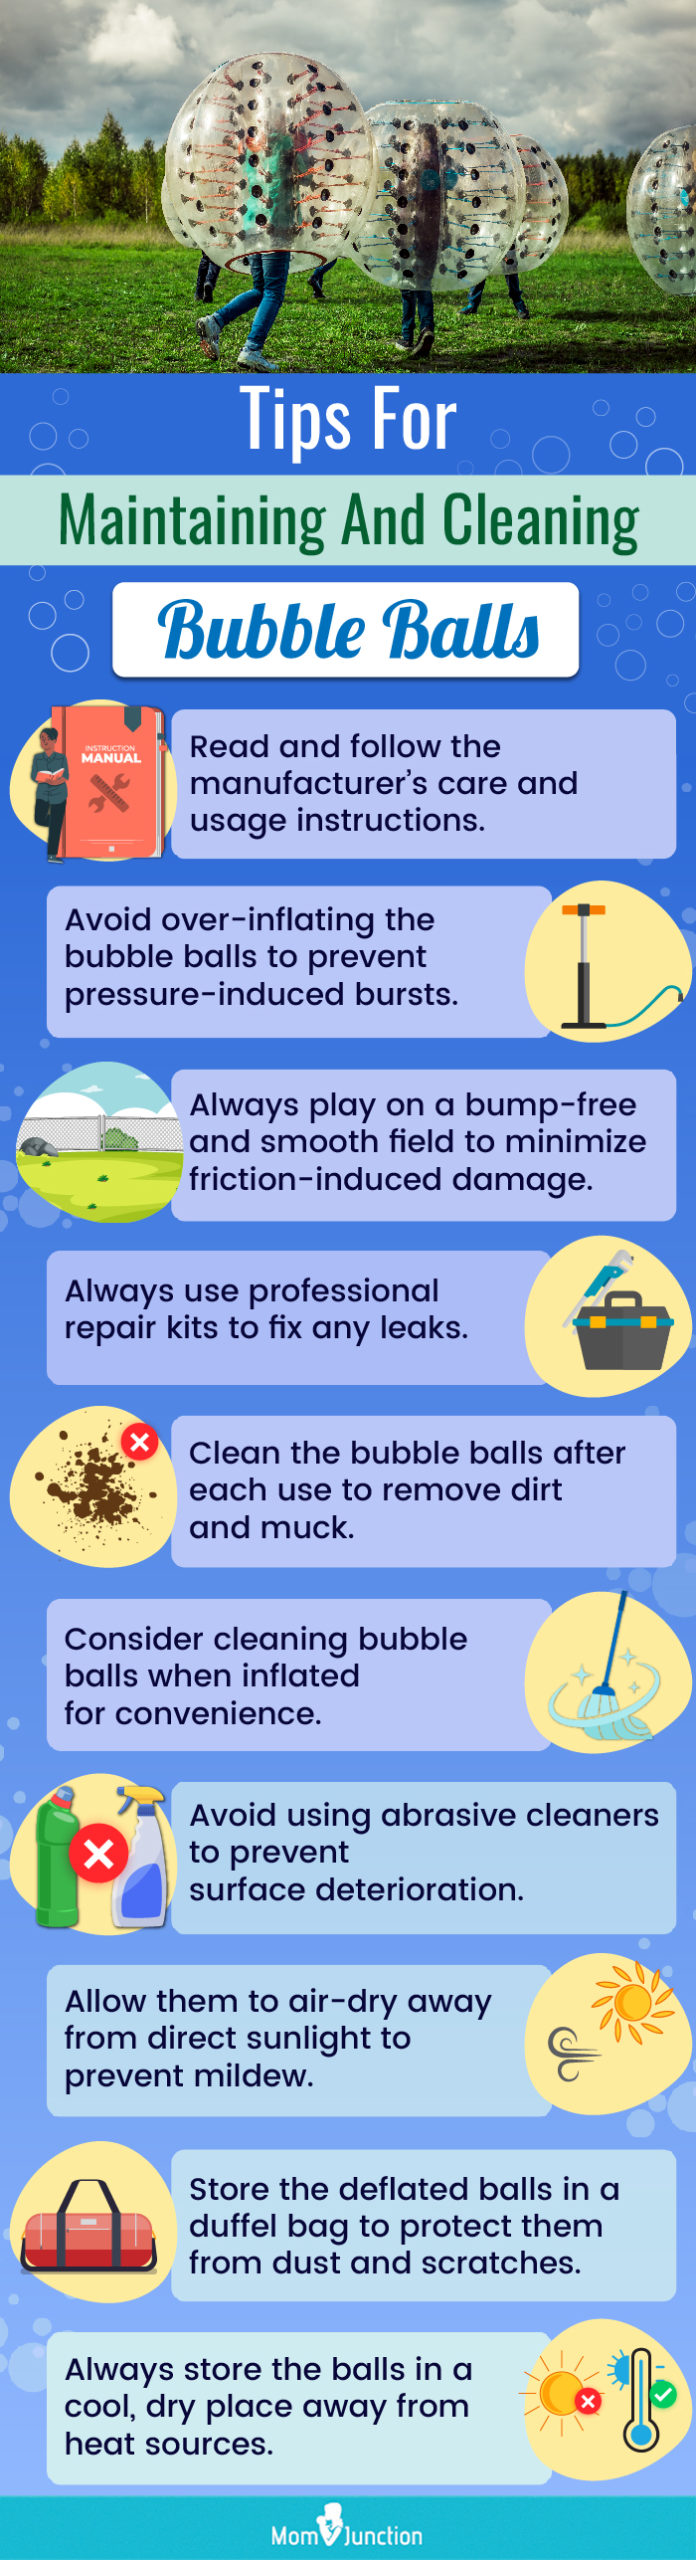 Tips For Maintaining And Cleaning Bubble Balls (infographic)